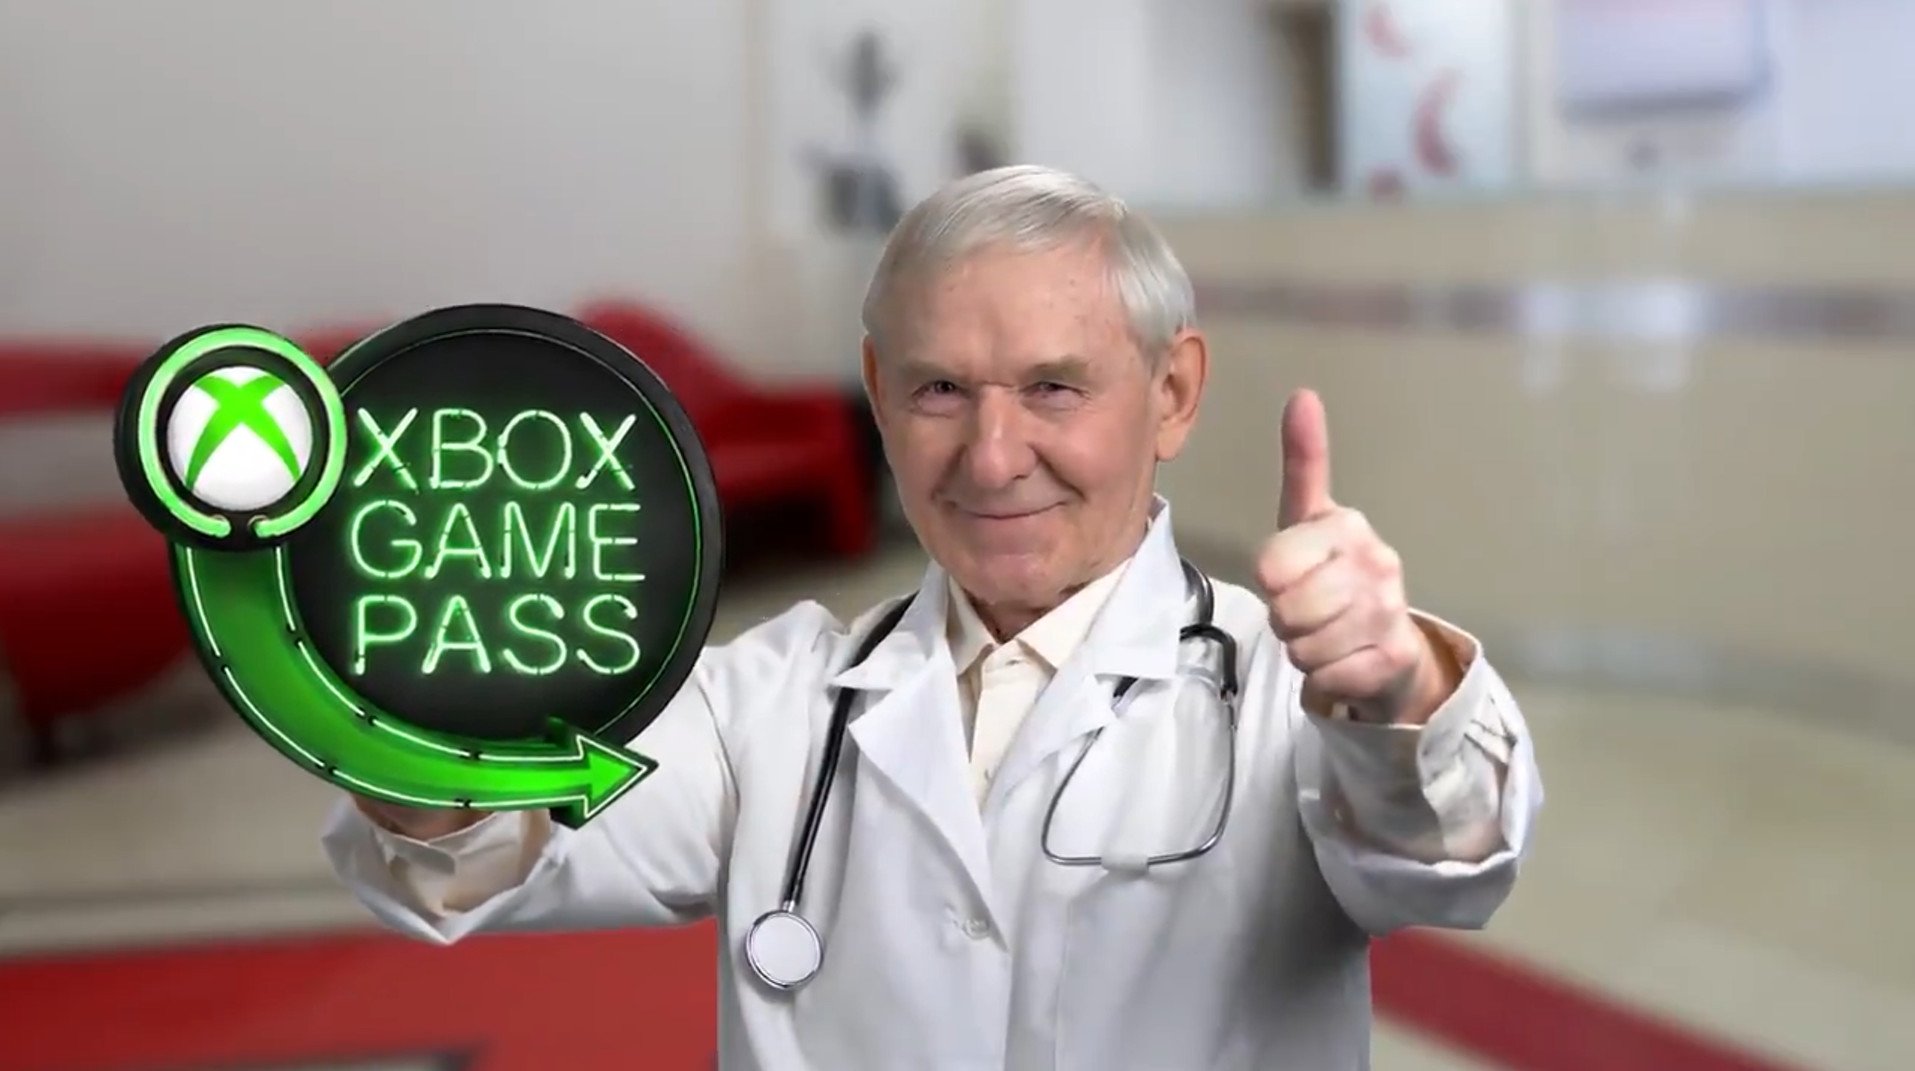 Meme-filled Xbox Game Pass ad is marketing done right